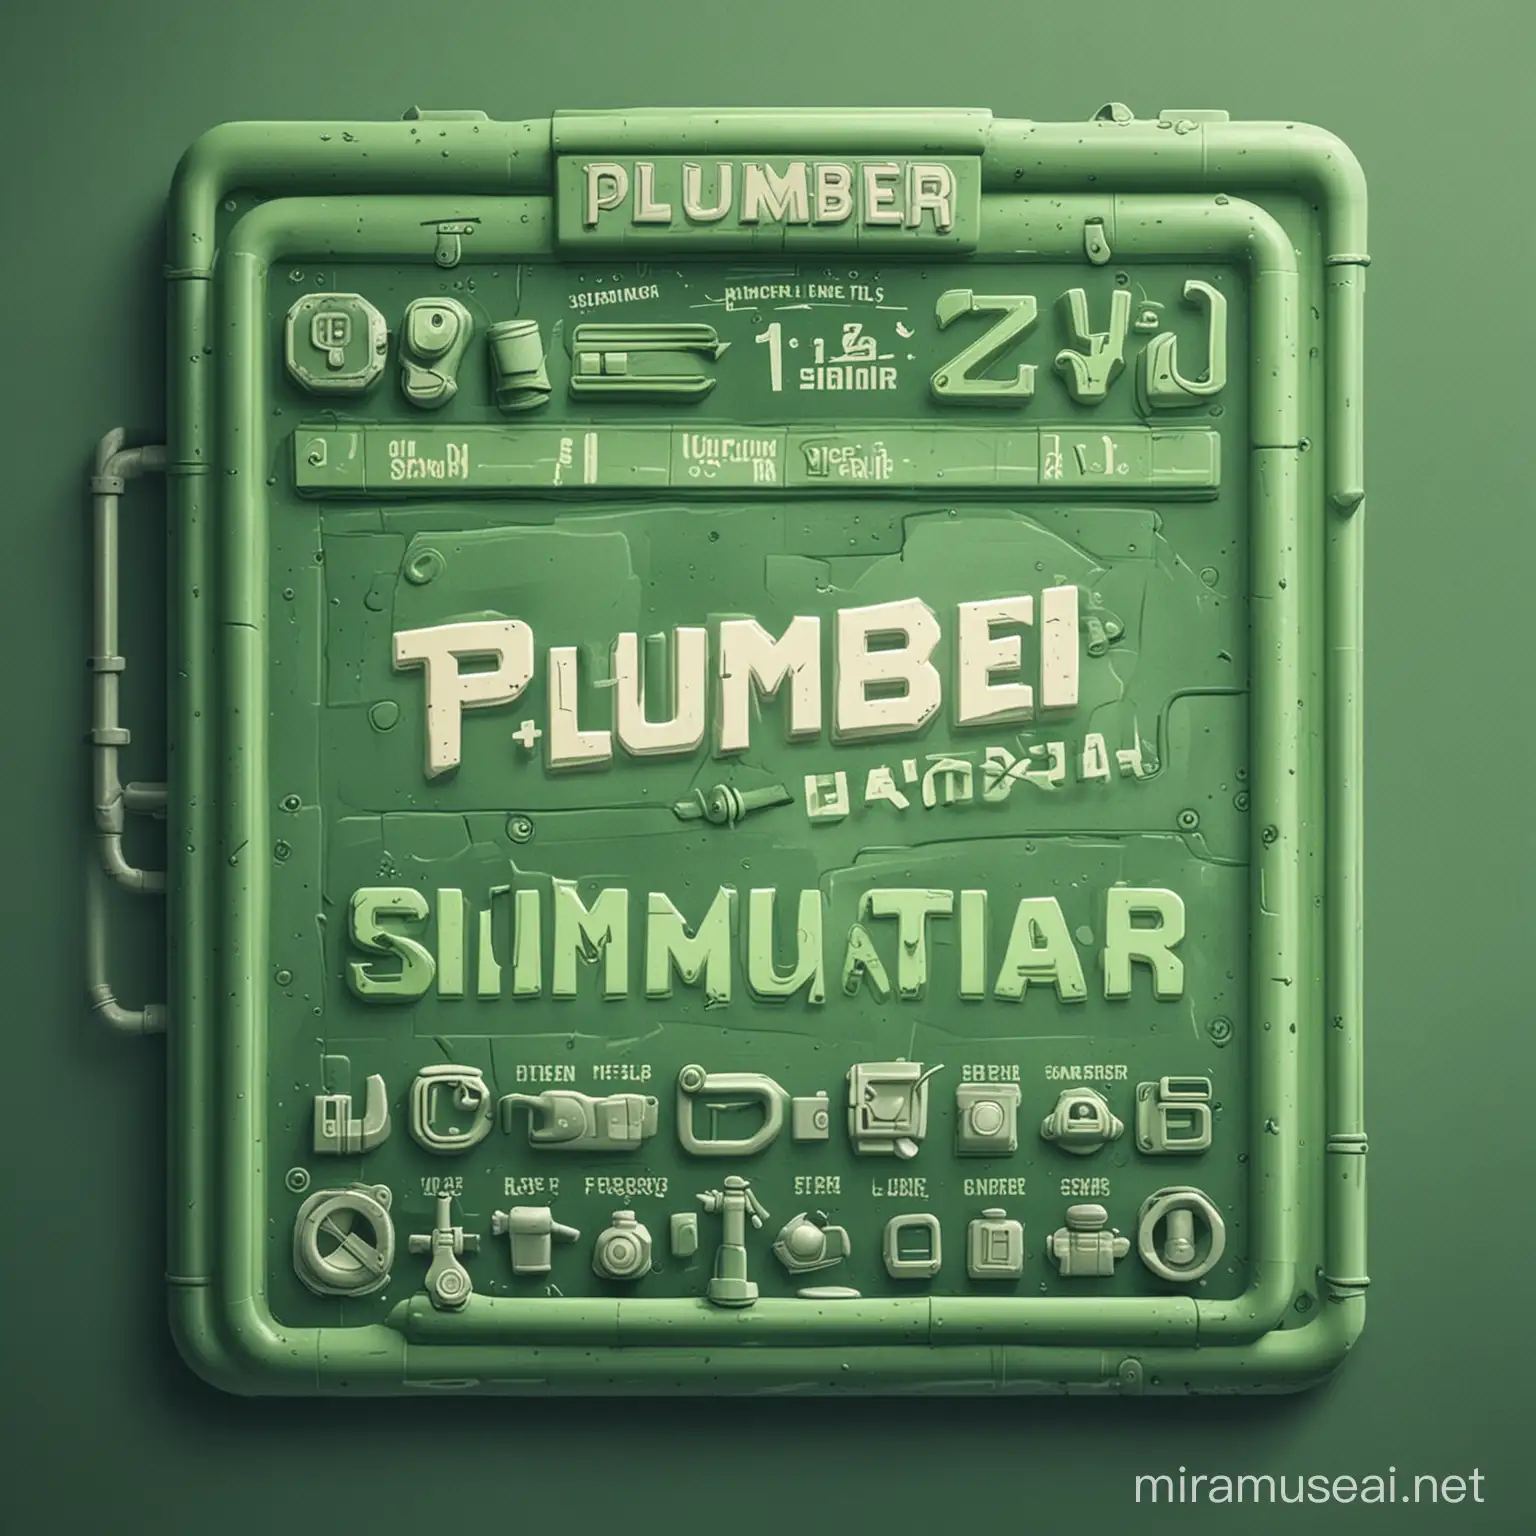 Plumber Simulator Greenthemed Game Screen with Catchy Graphics